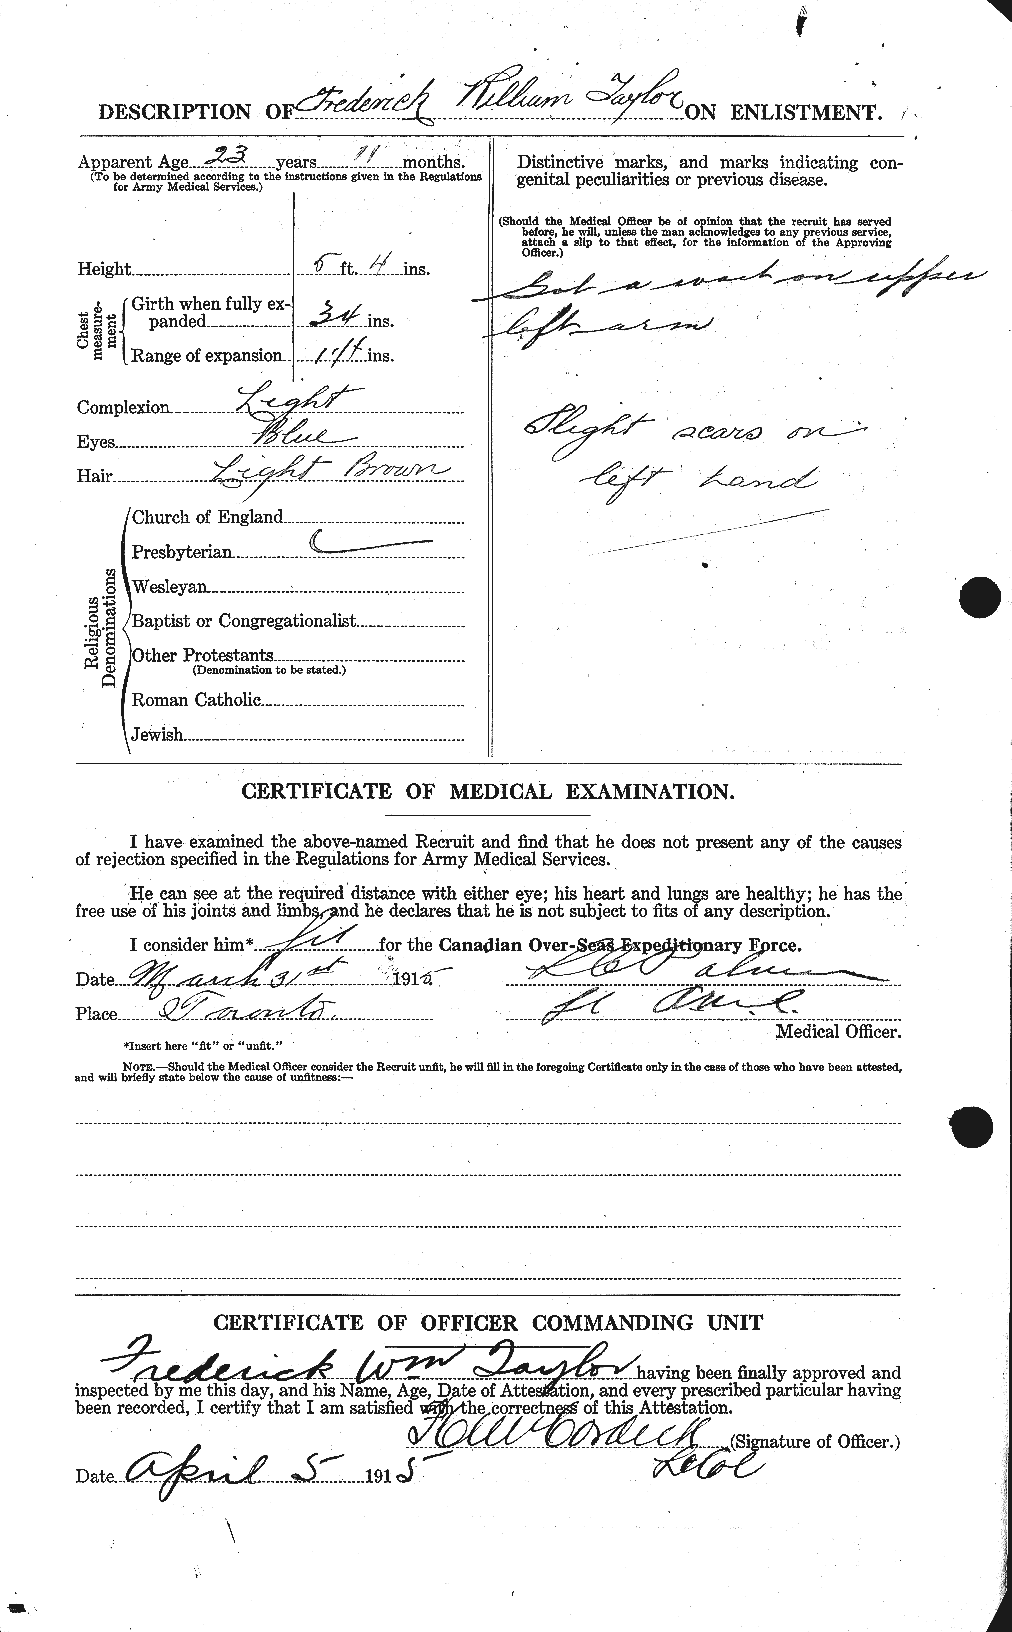 Personnel Records of the First World War - CEF 625822b